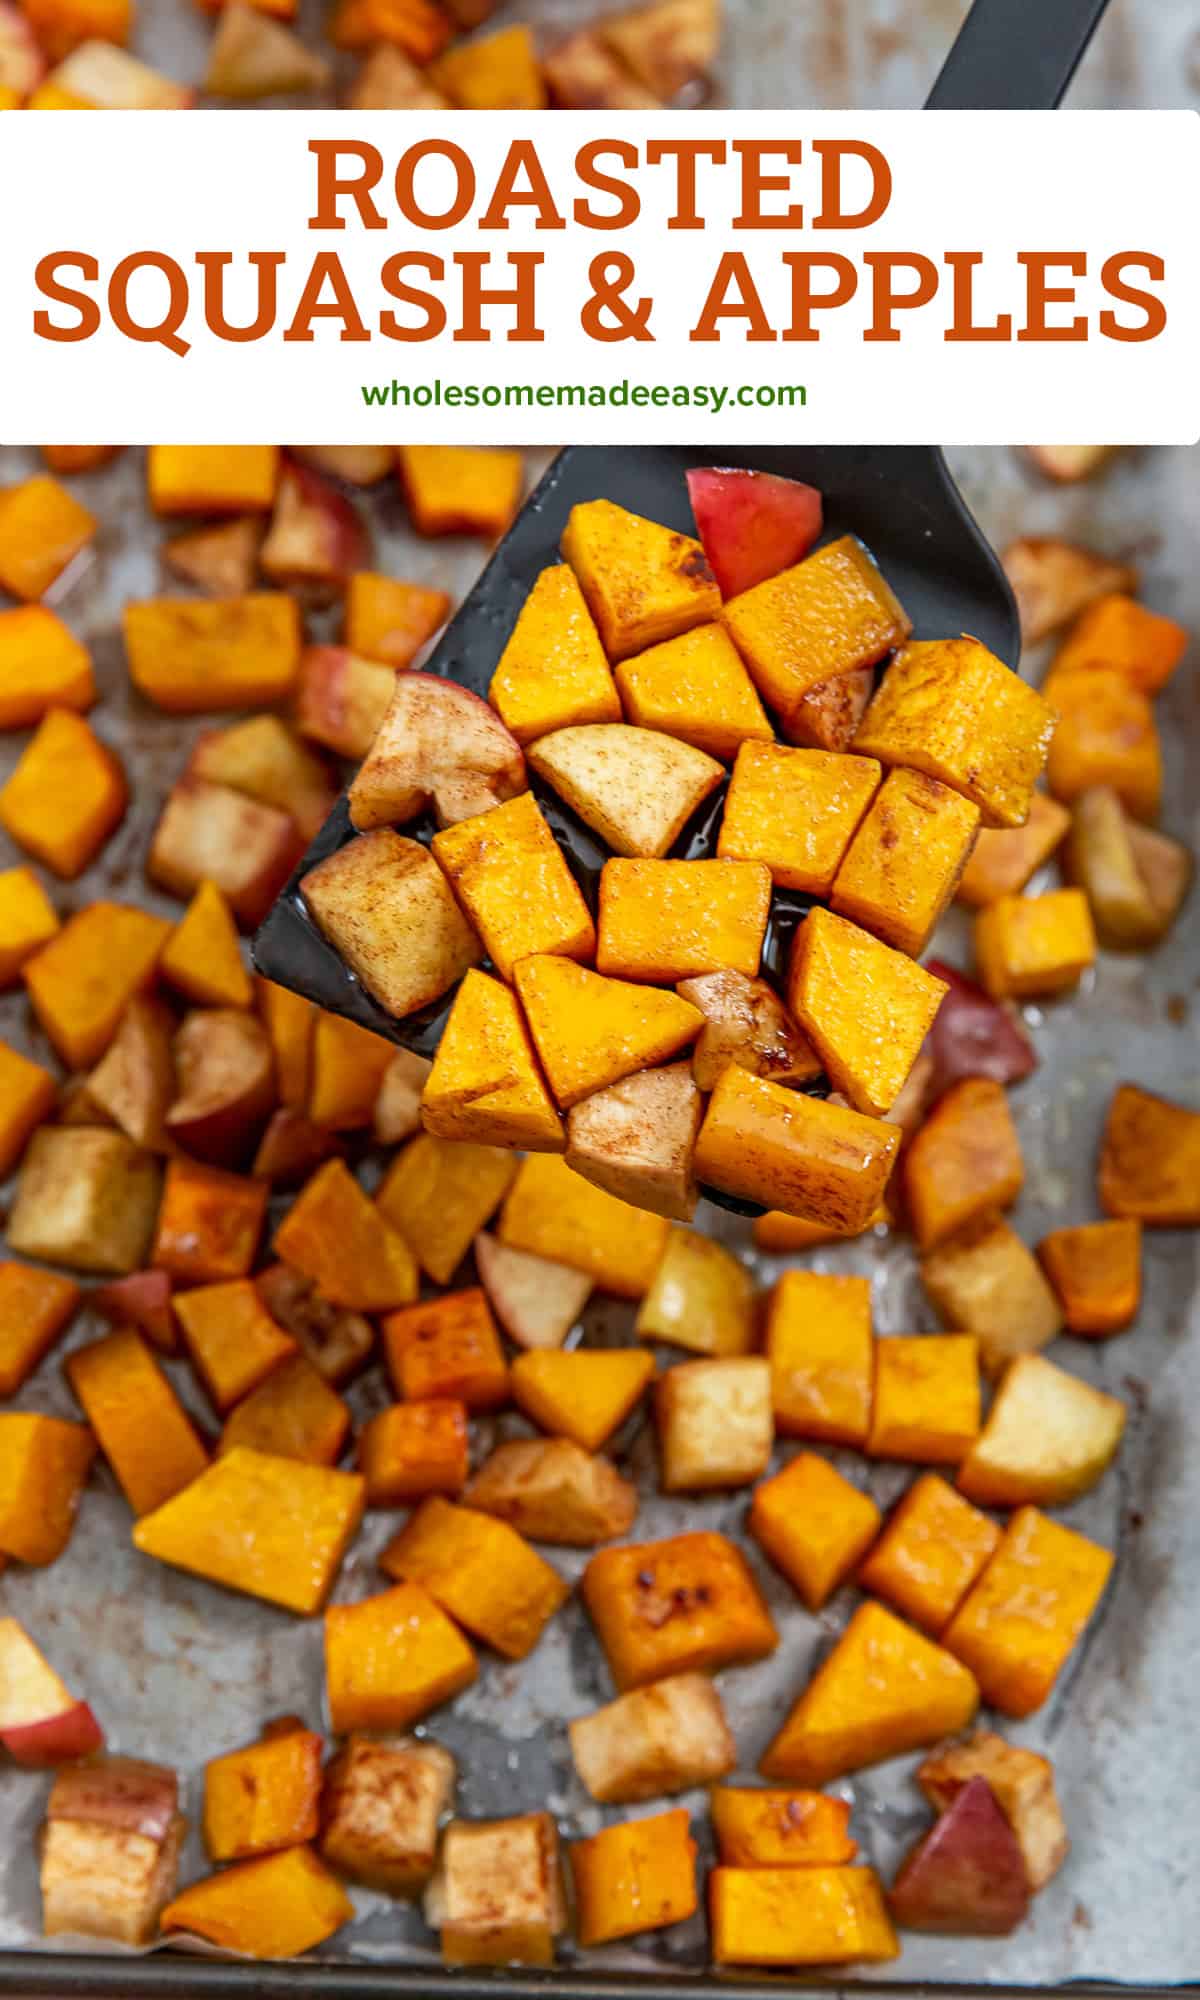 A spatula lifts roasted butternut squash and apples from a baking sheet.